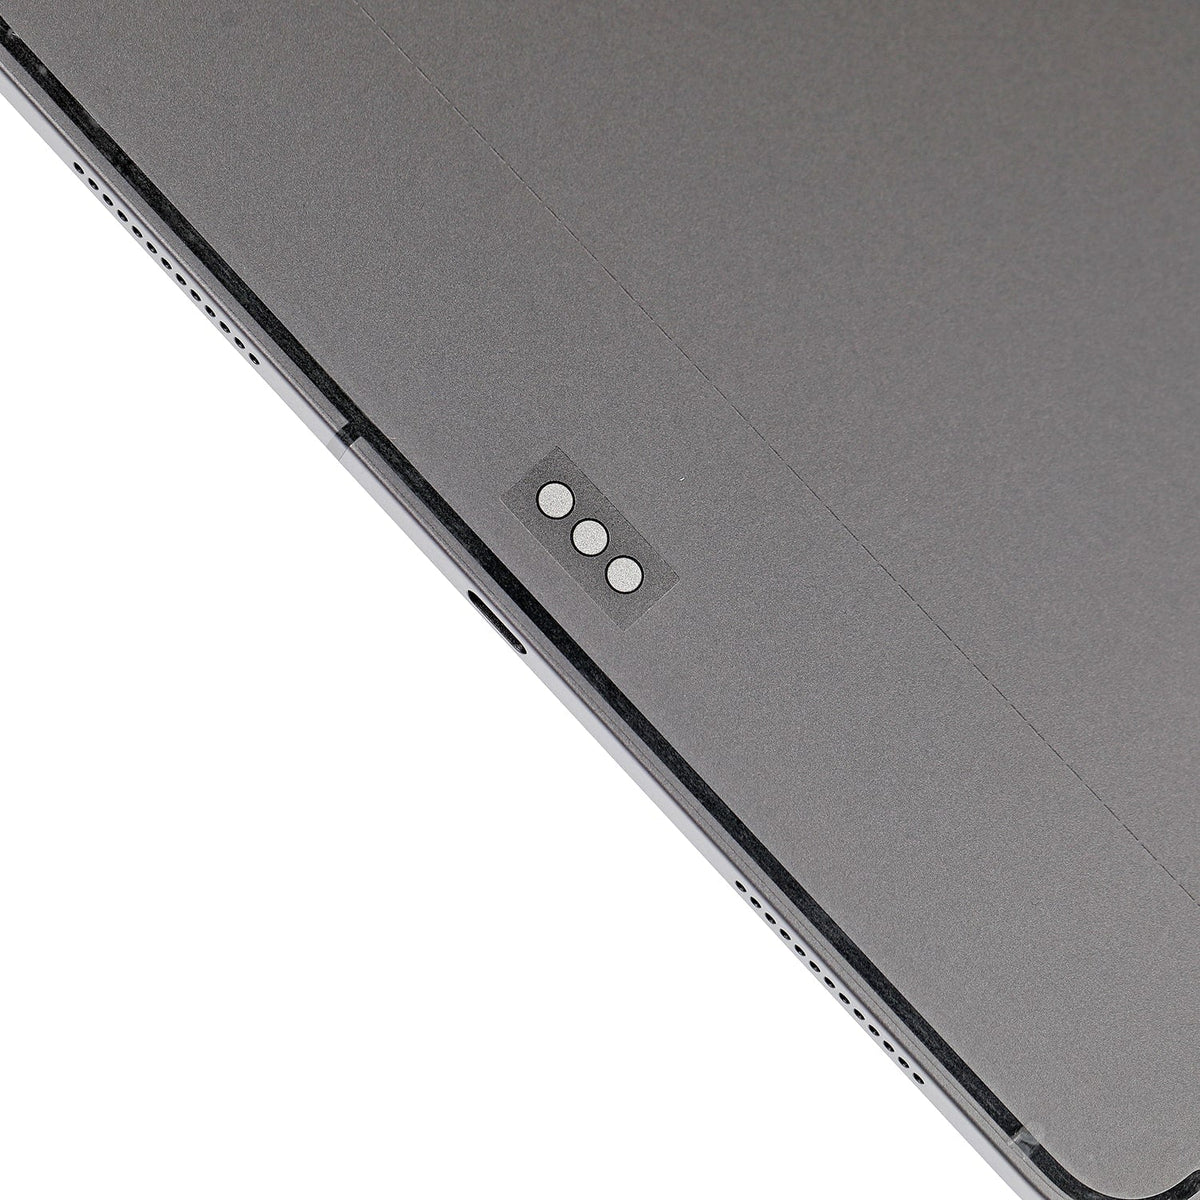 BACK COVER WIFI + CELLULAR VERSION FOR IPAD PRO 11(2ND) - GRAY